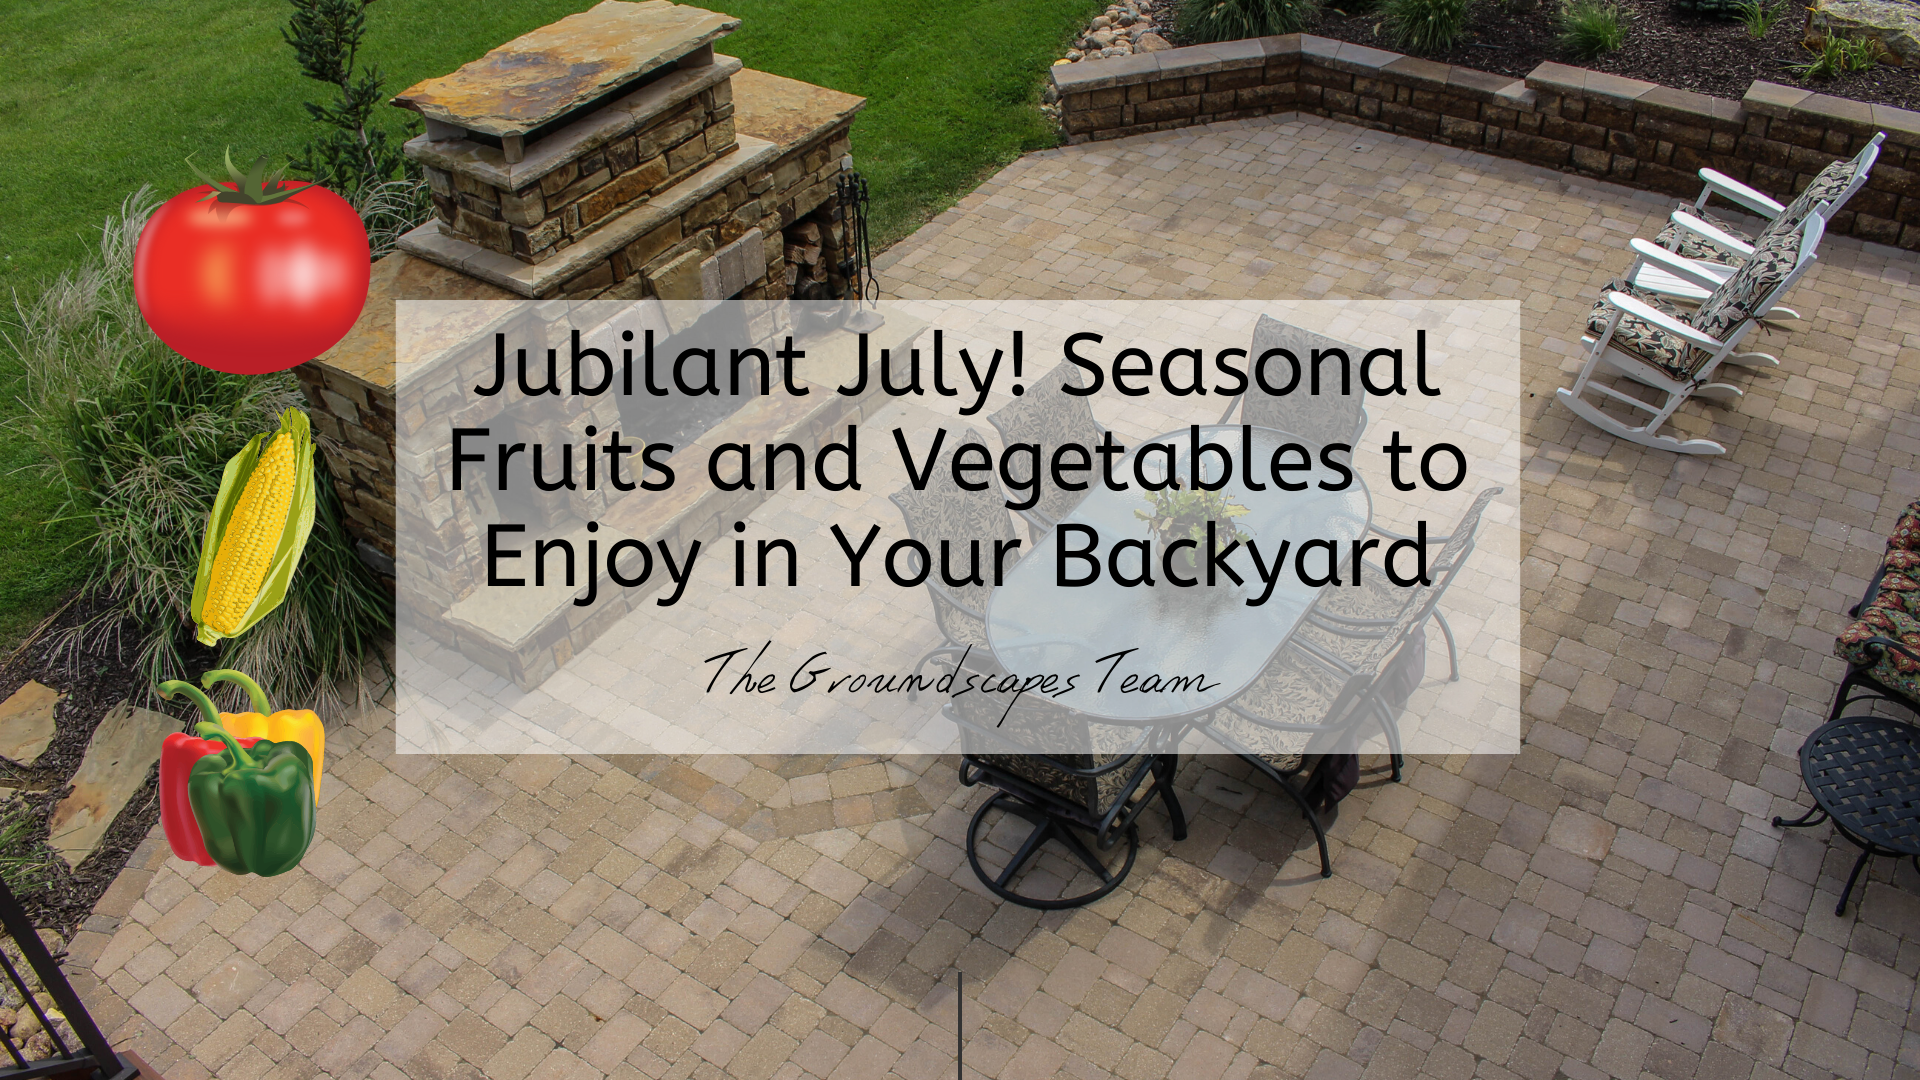 Jubilant July! Seasonal Fruits and Vegetables to Enjoy in Your Backyard